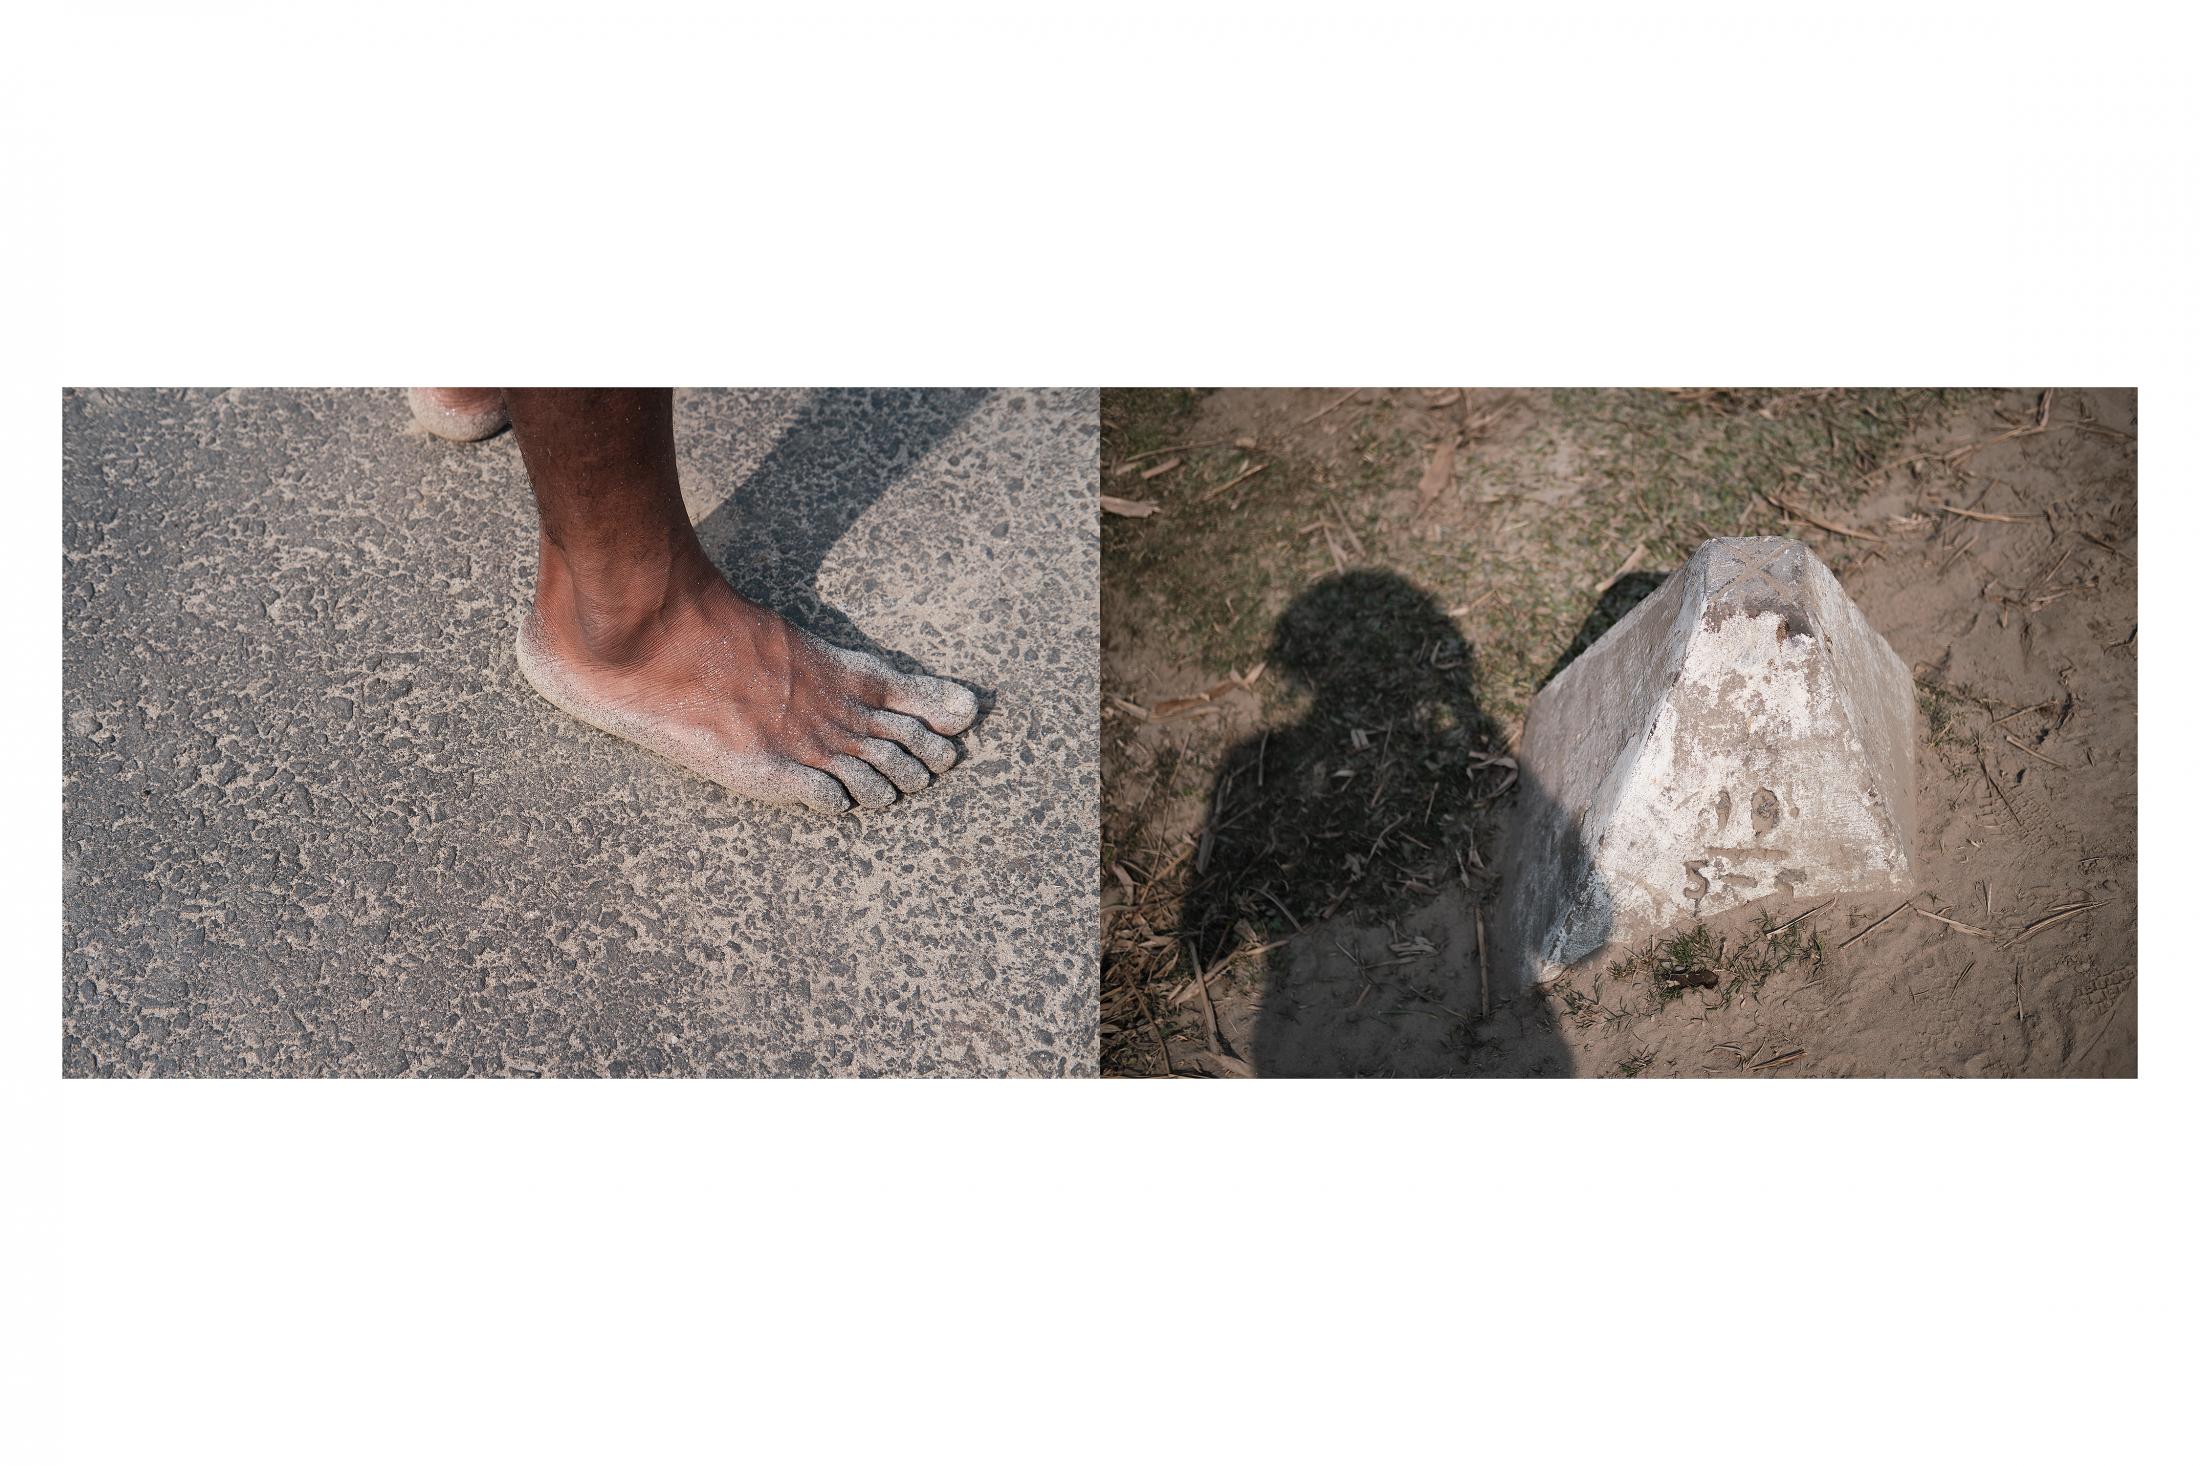 In Search of Intimacy - A Walking, Working Feet and a Border Pillar. Tin Bigha...